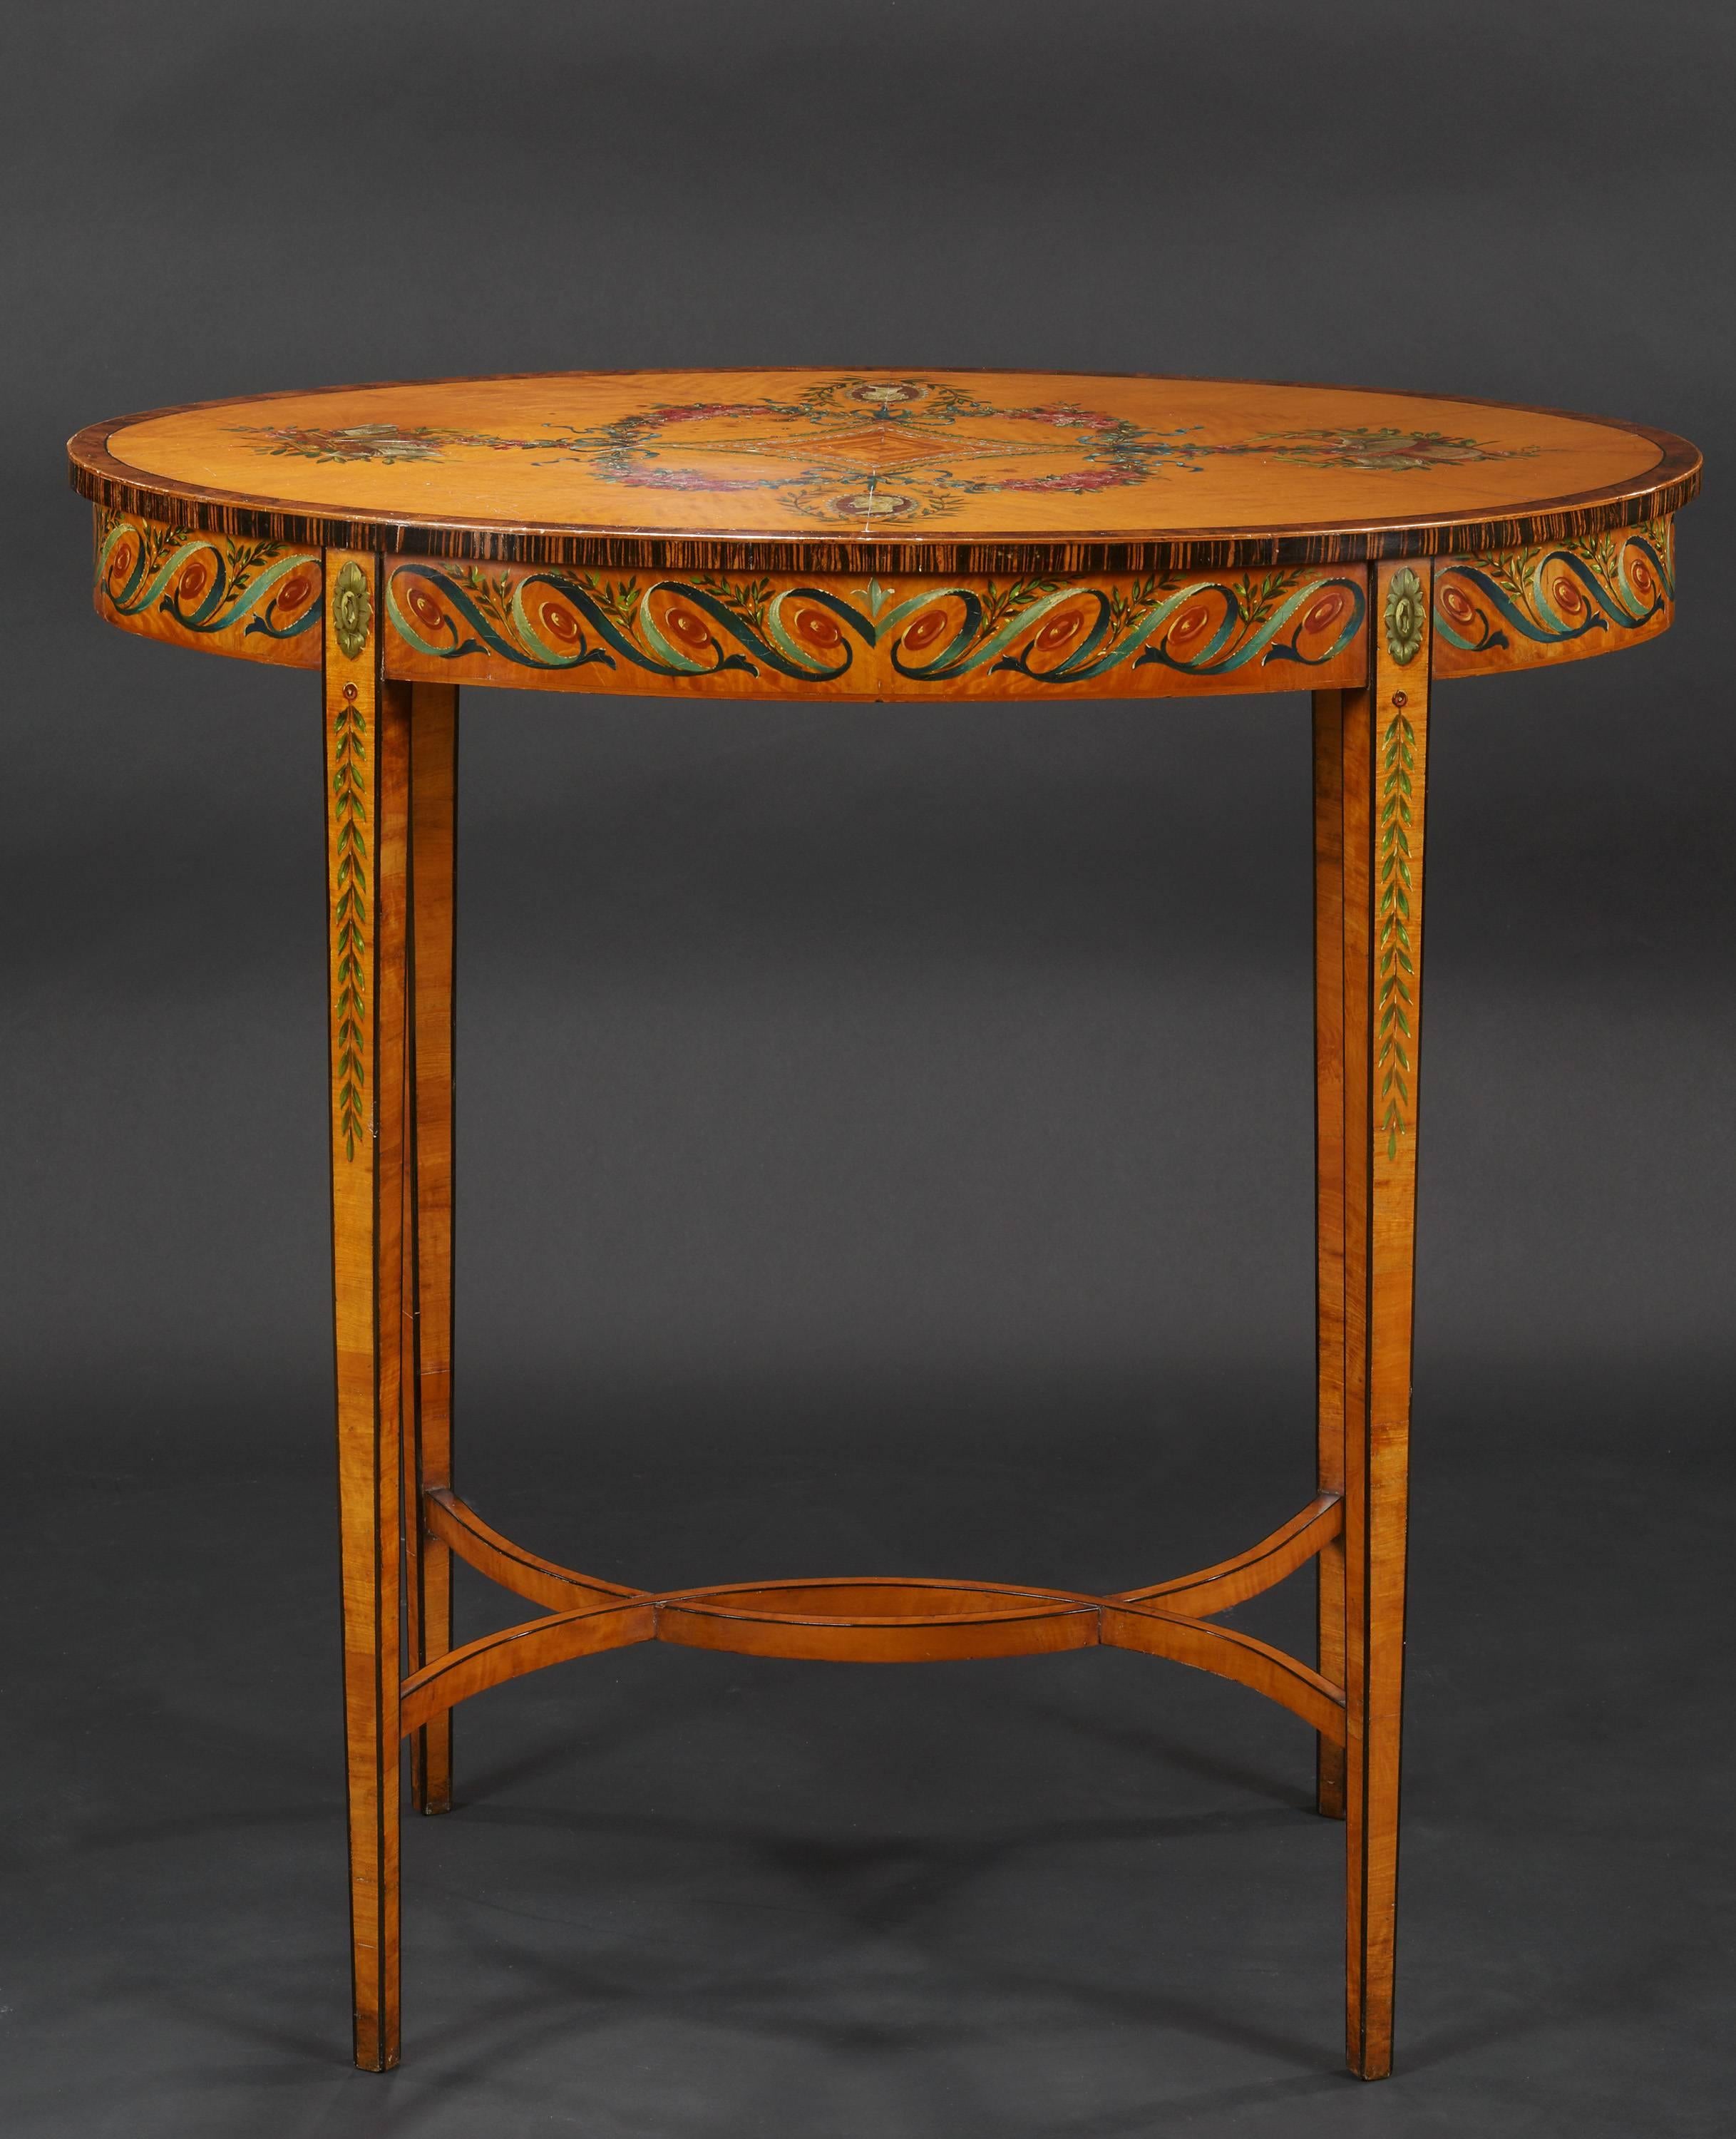 Nineteenth century satinwood and fruitwood oval polychrome painted side table beautifully decorated top with a coromandel banding on tapering supports with intertwining stretcher, circa 1870.